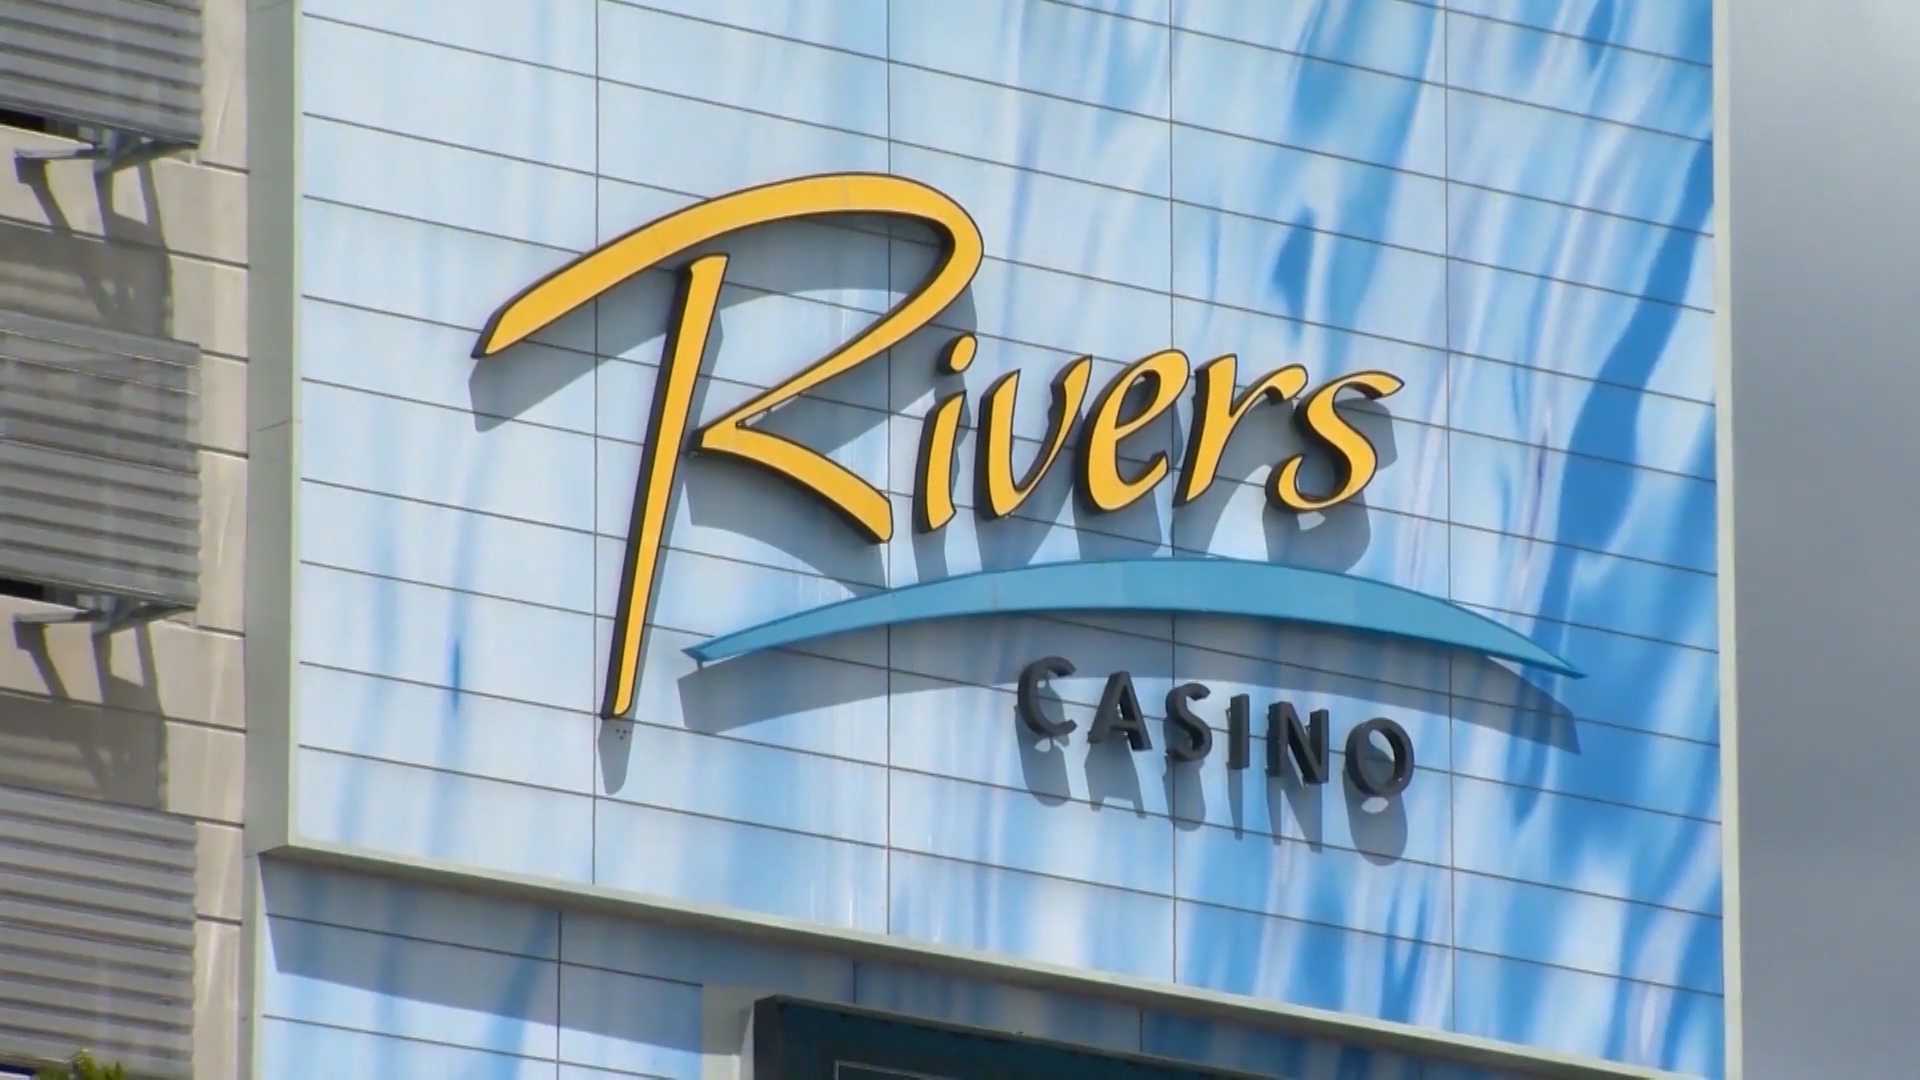 rivers casino chicago drinks comped